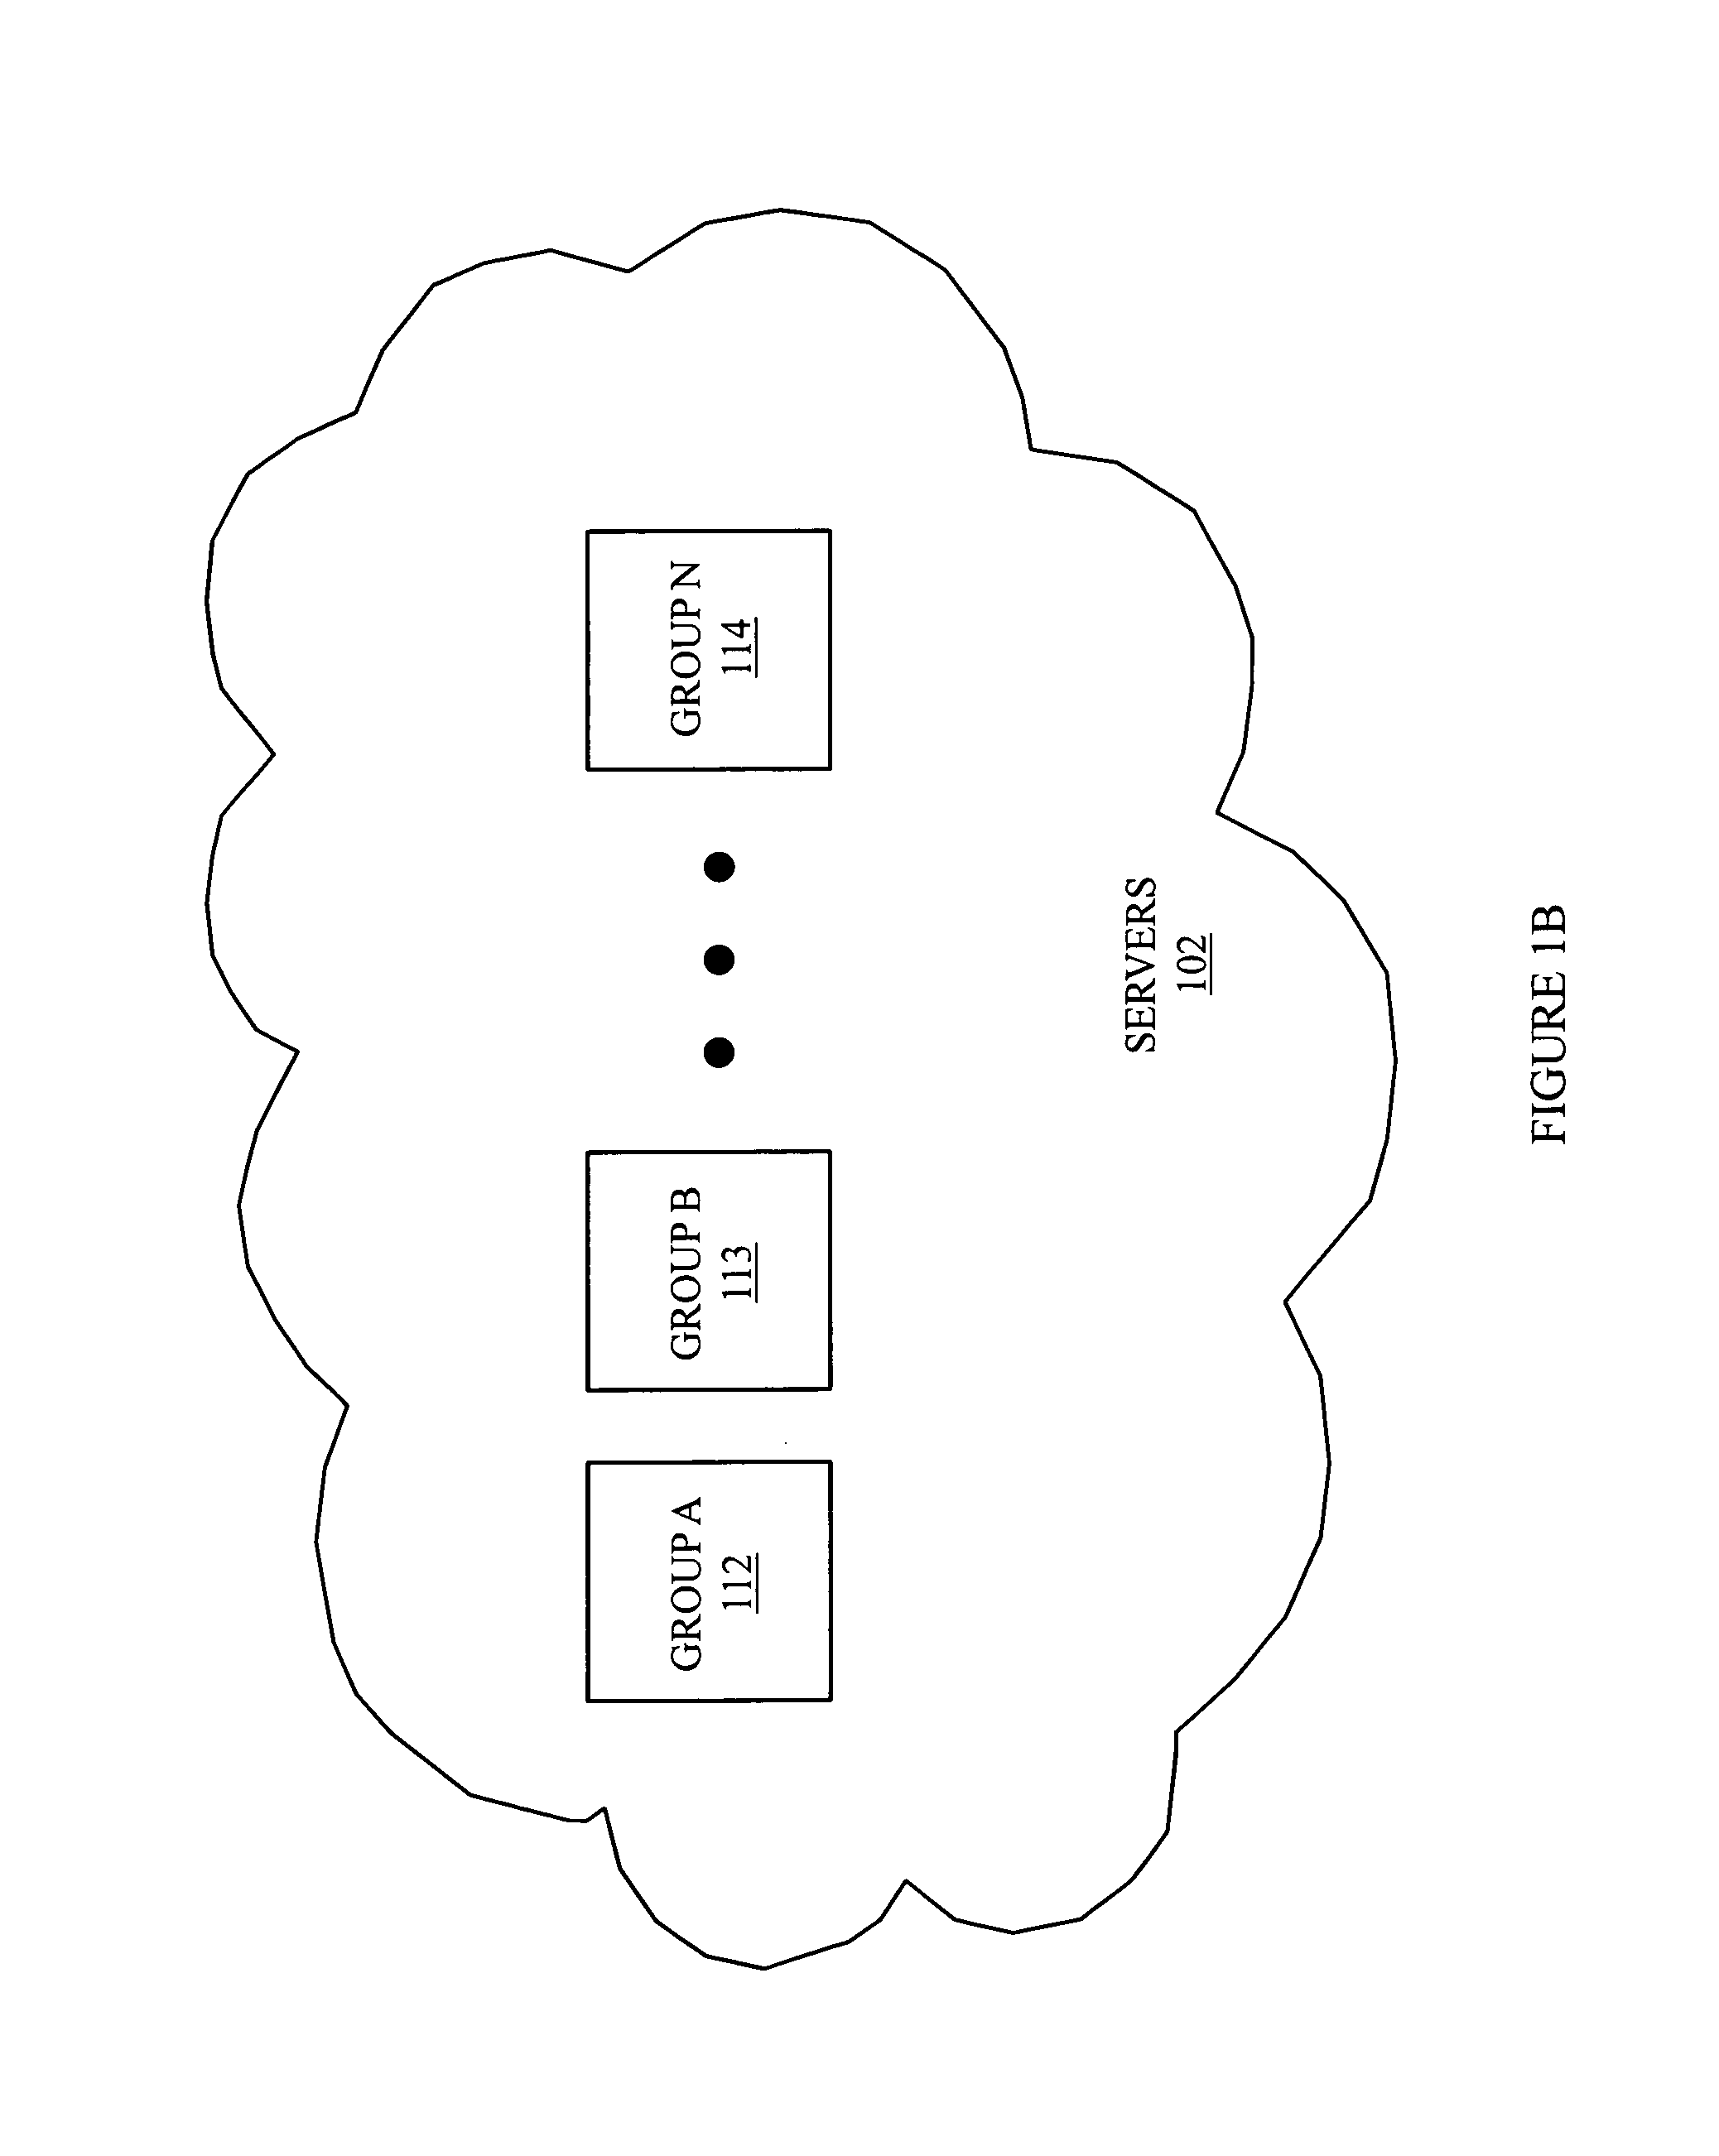 Policy-based meta-data driven co-location of computation and datasets in the cloud